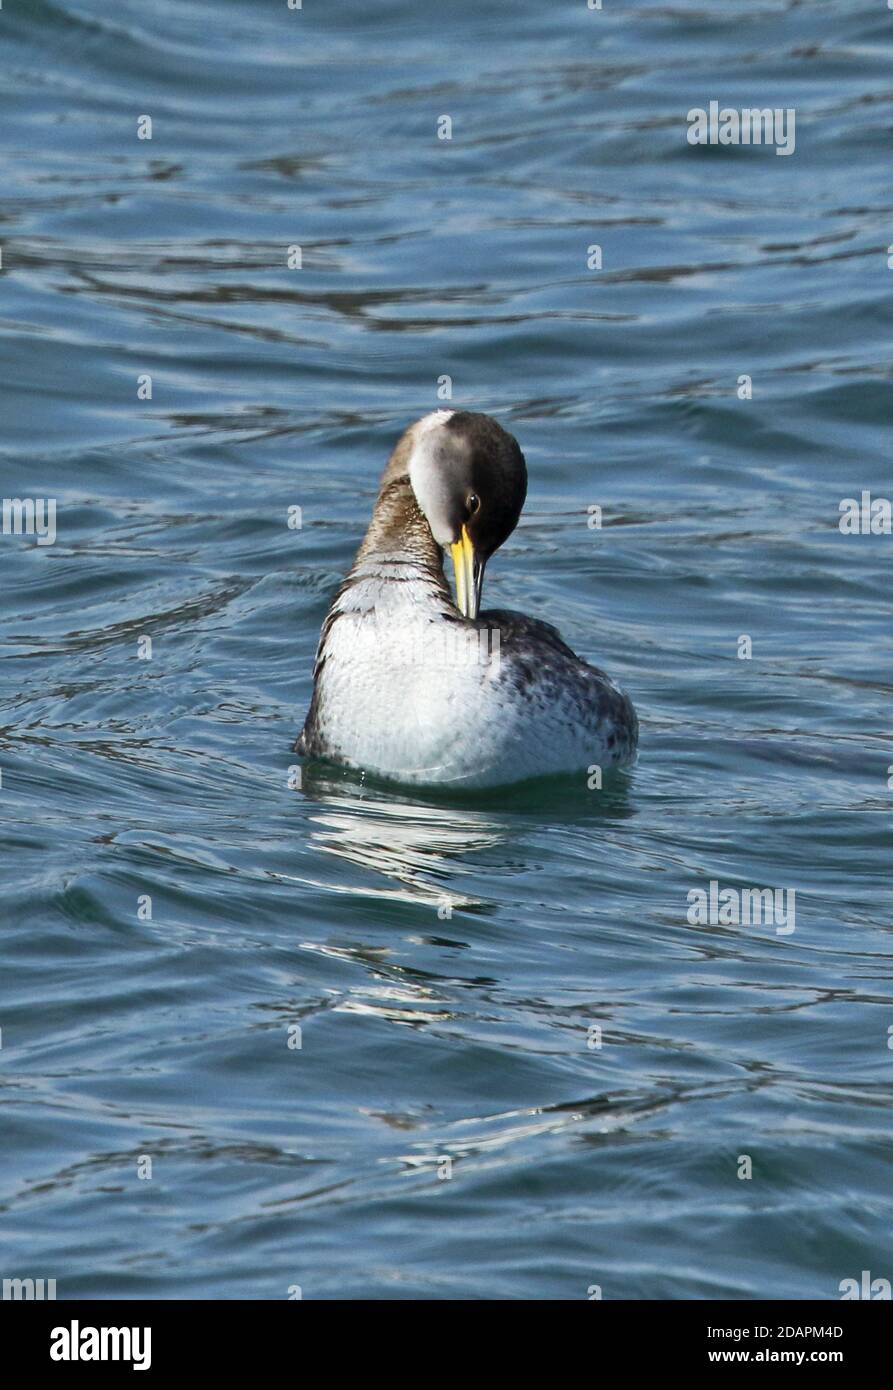 Red-necked Grebe (Podiceps grisegena holbollii) winter plumage adult swimming in harbour, preening  Choshi, Chiba Prefecture, Japan        February Stock Photo